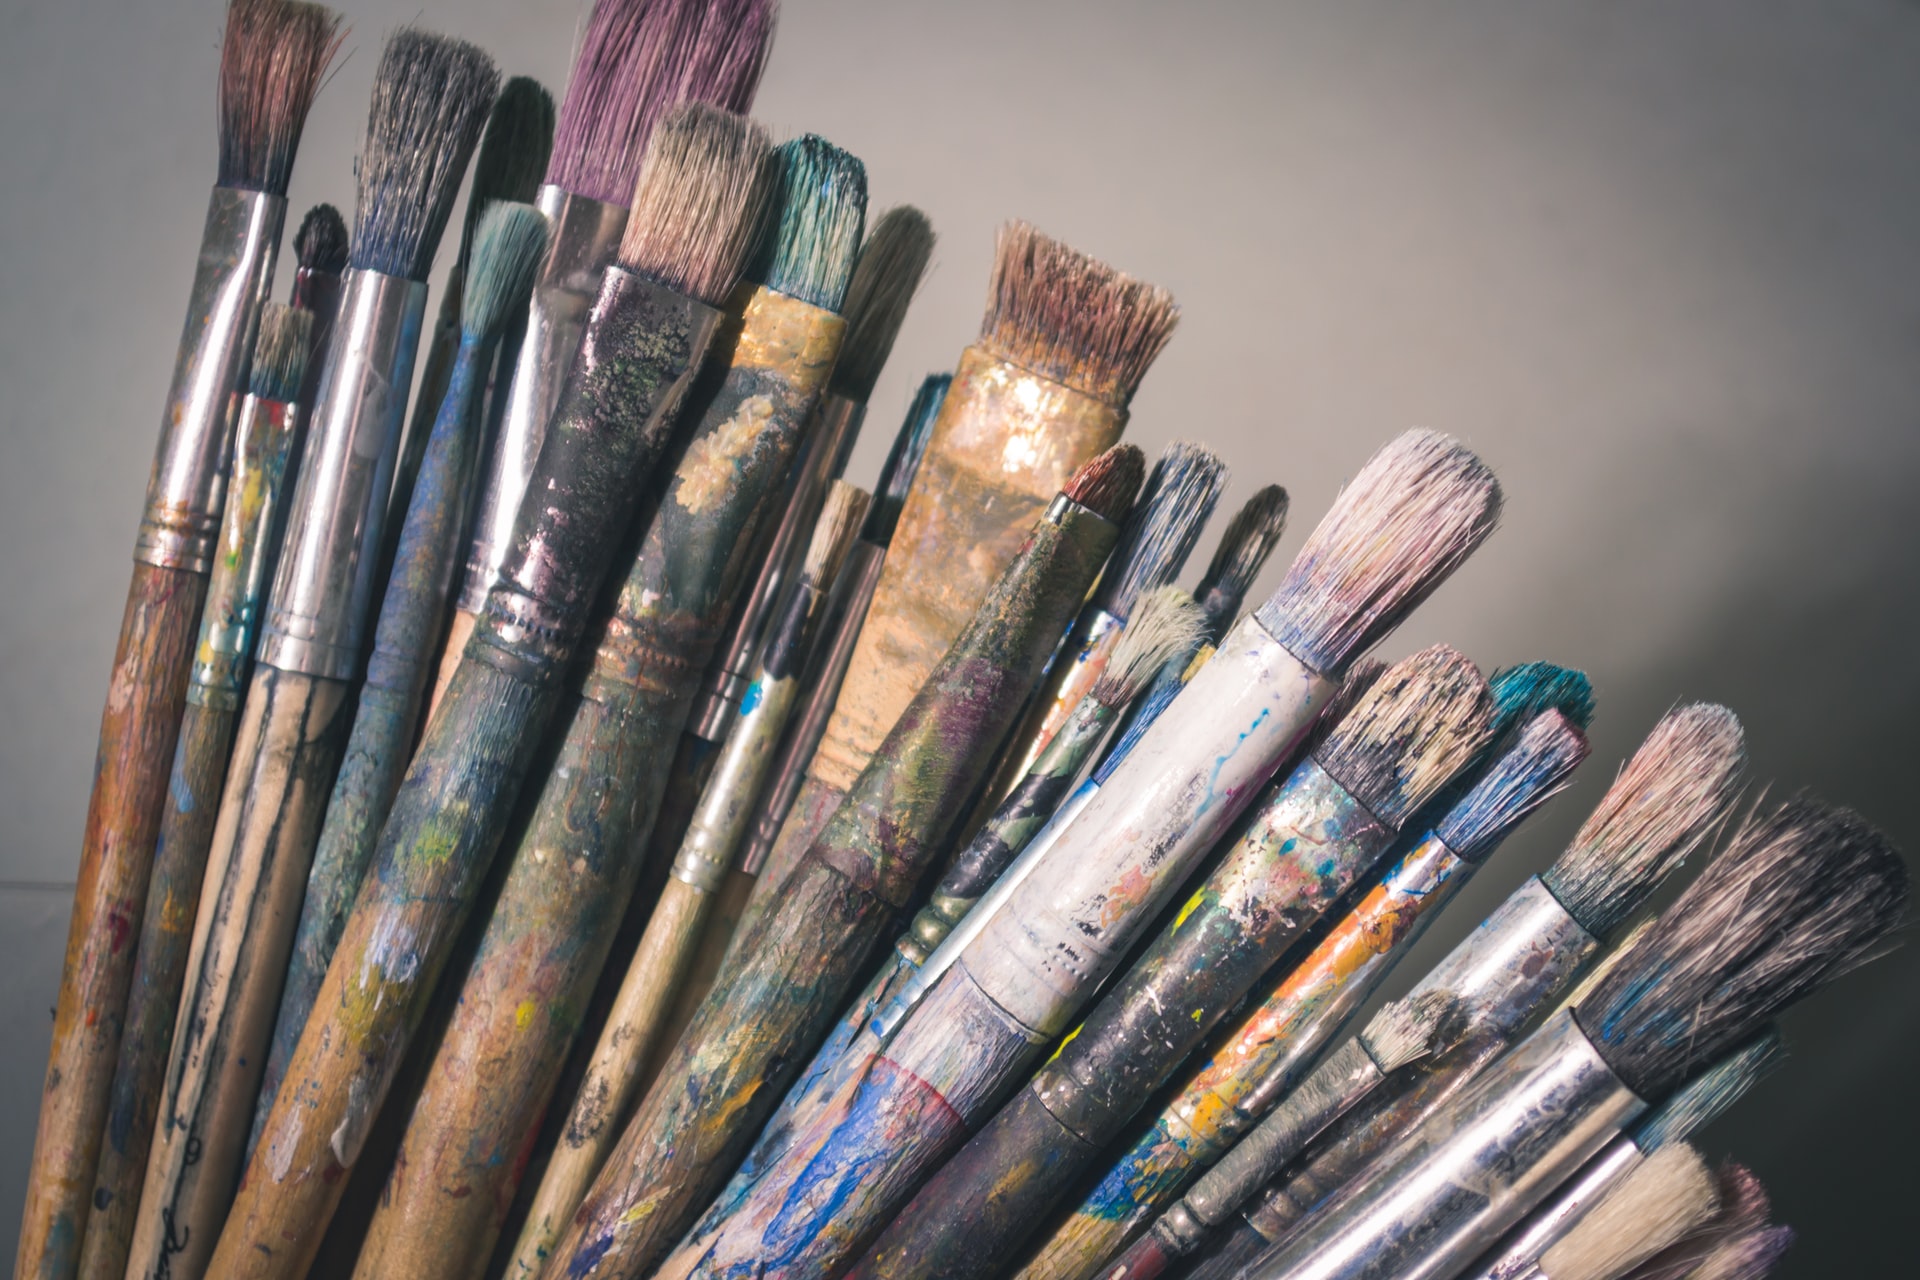 Deconstructing Narratives About Artistic Mastery in Art Education